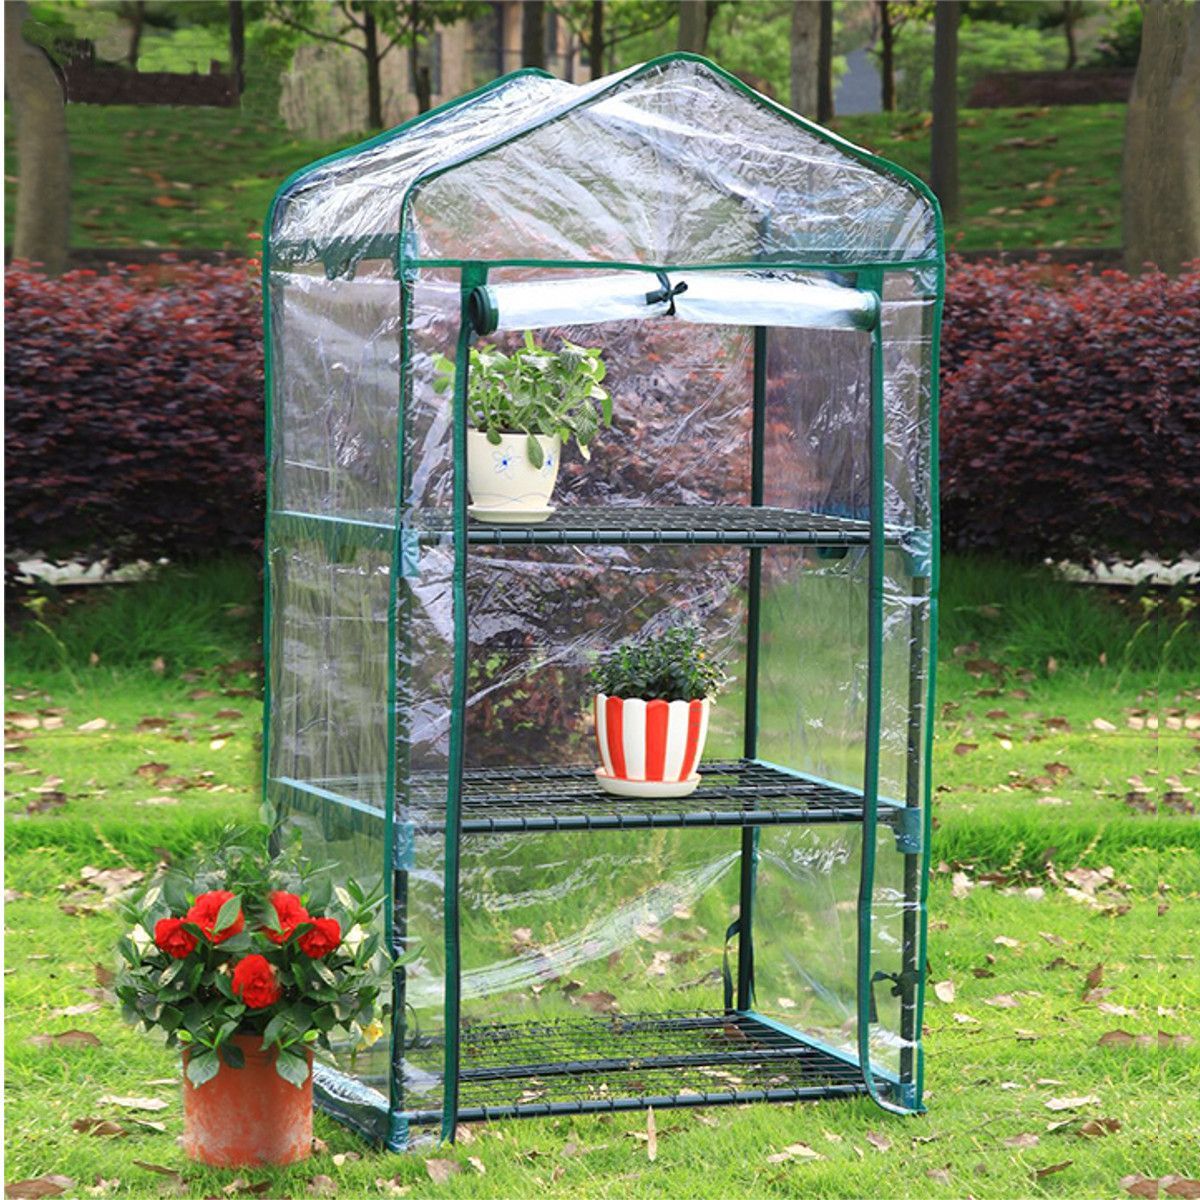 Greenhouse-Garden-Green-Hot-Plant-House-Shed-Storage-PE-Cover-Apex-Roof--Storage-1669836